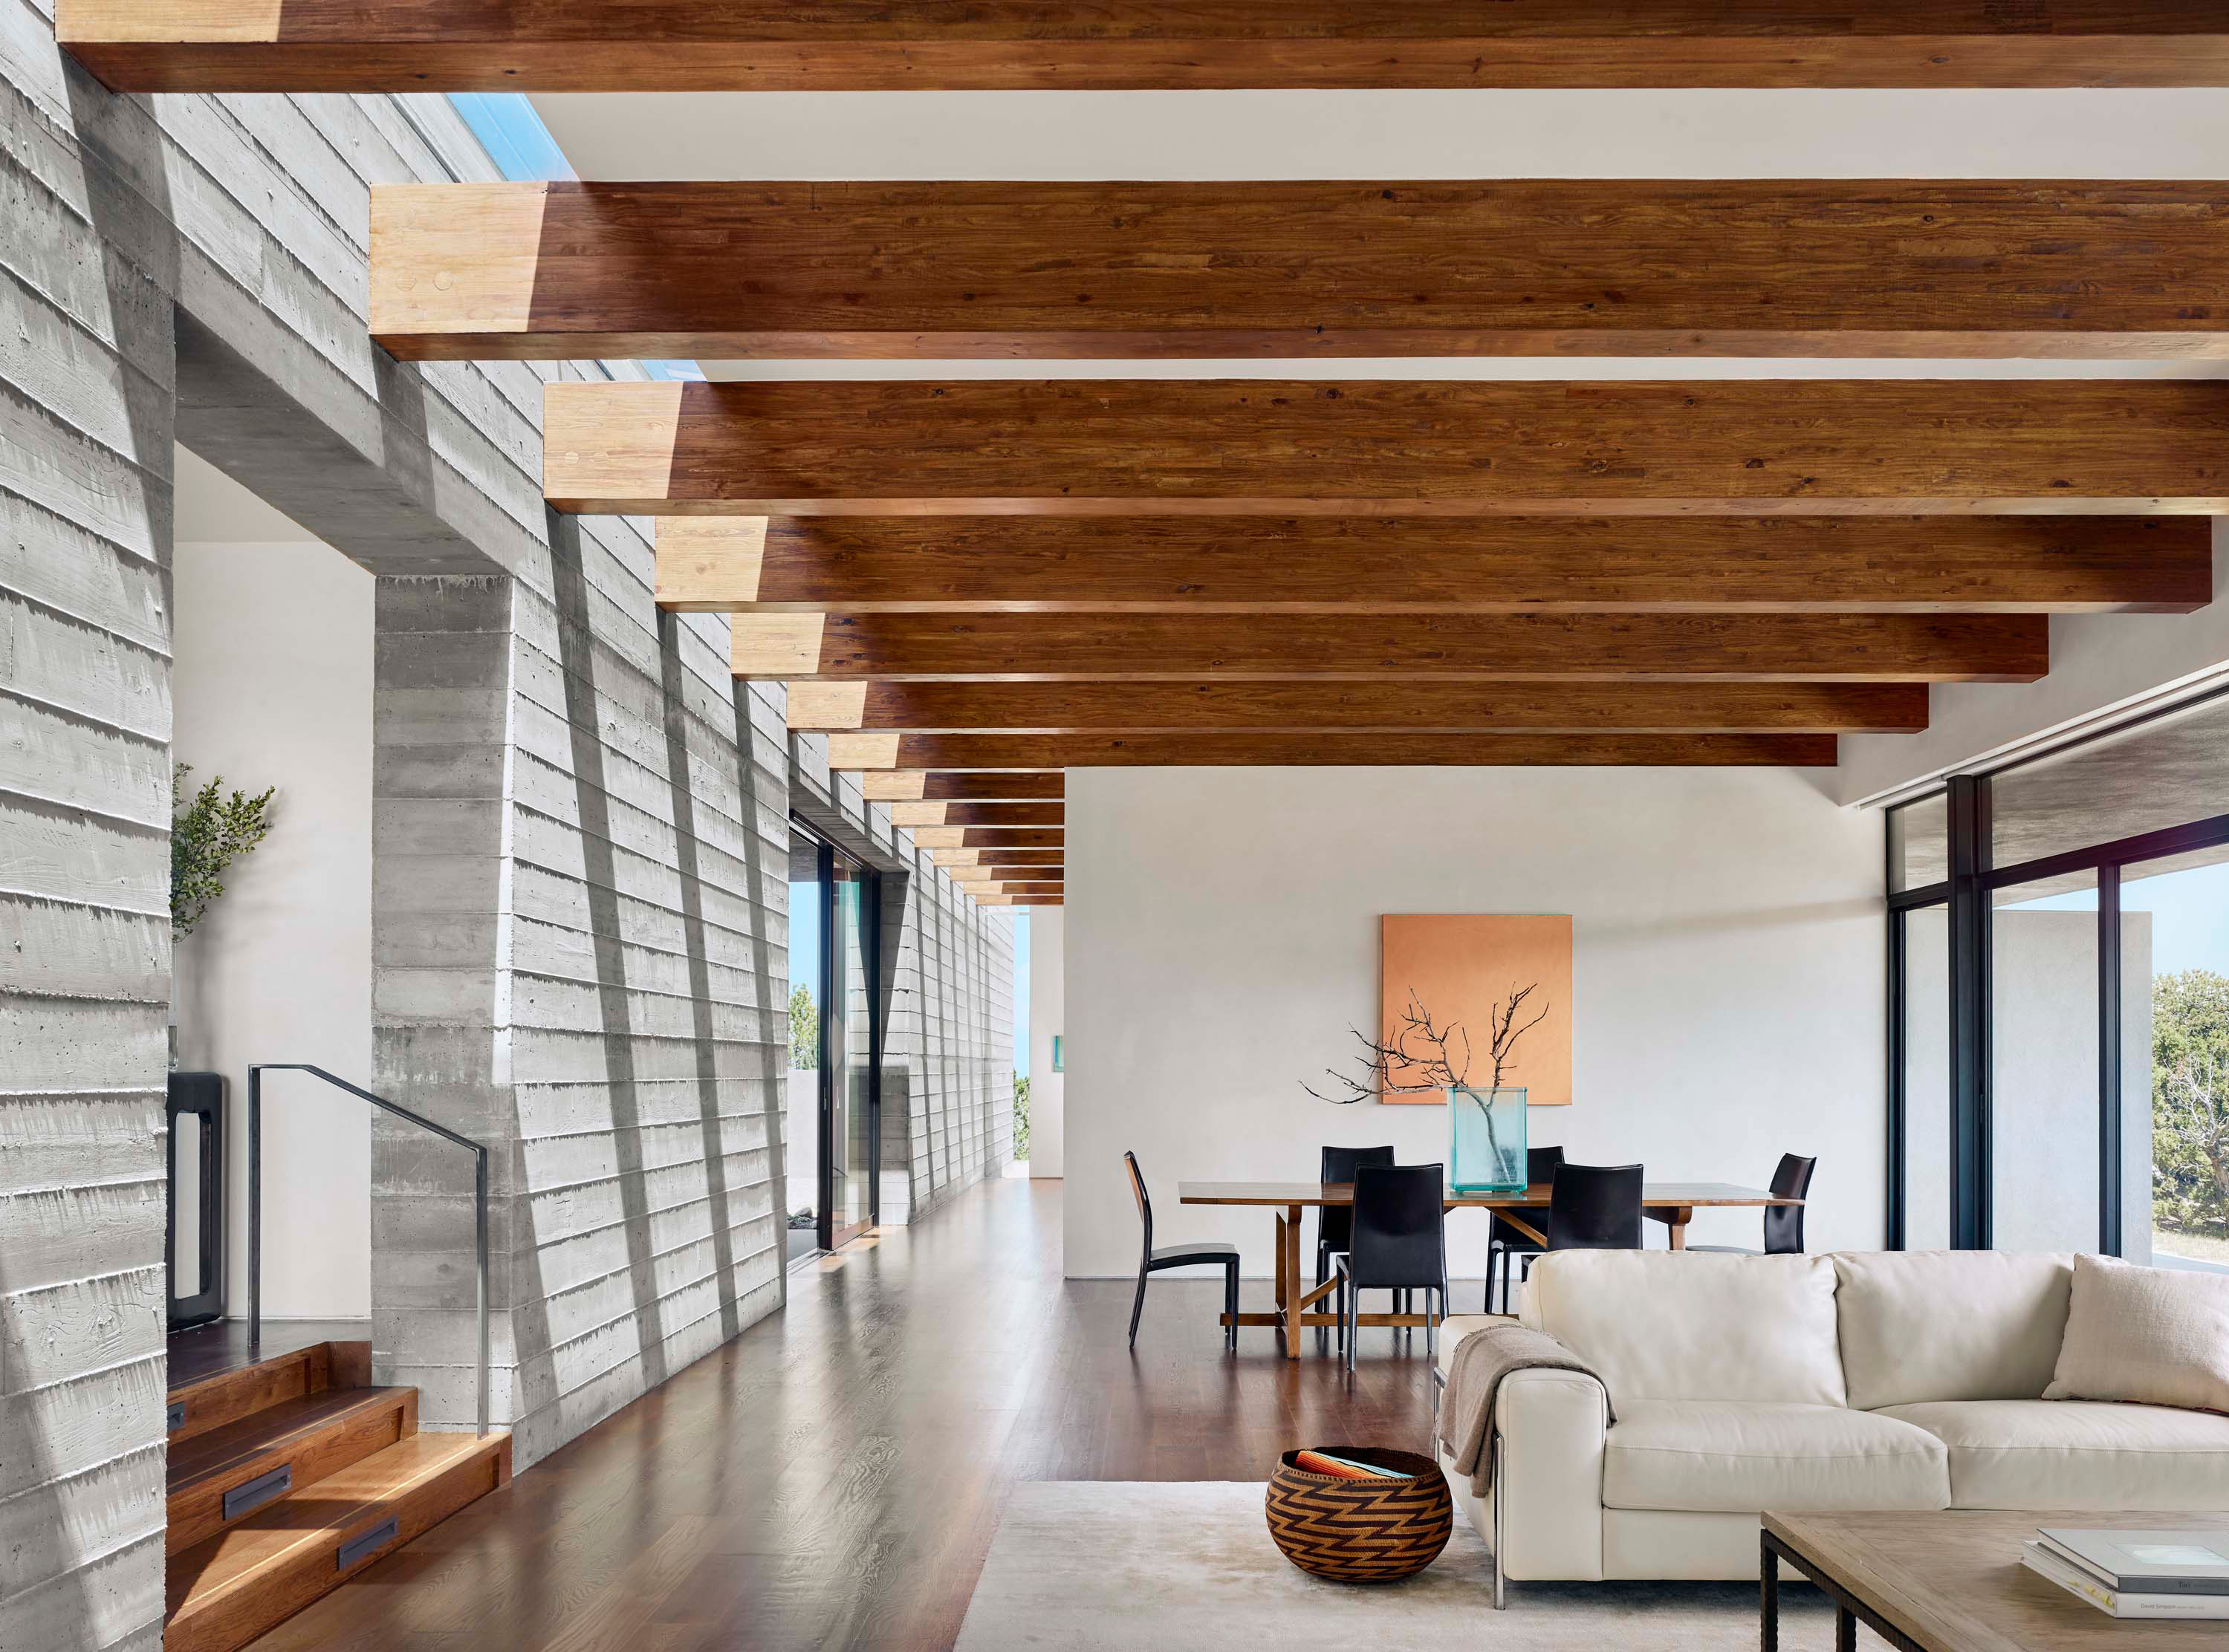 Interior photo of the Sangre de Cristo House by Specht Novak Architects. Shot by Casey Dunn, featuring bright living and dining areas with beamed ceilings.